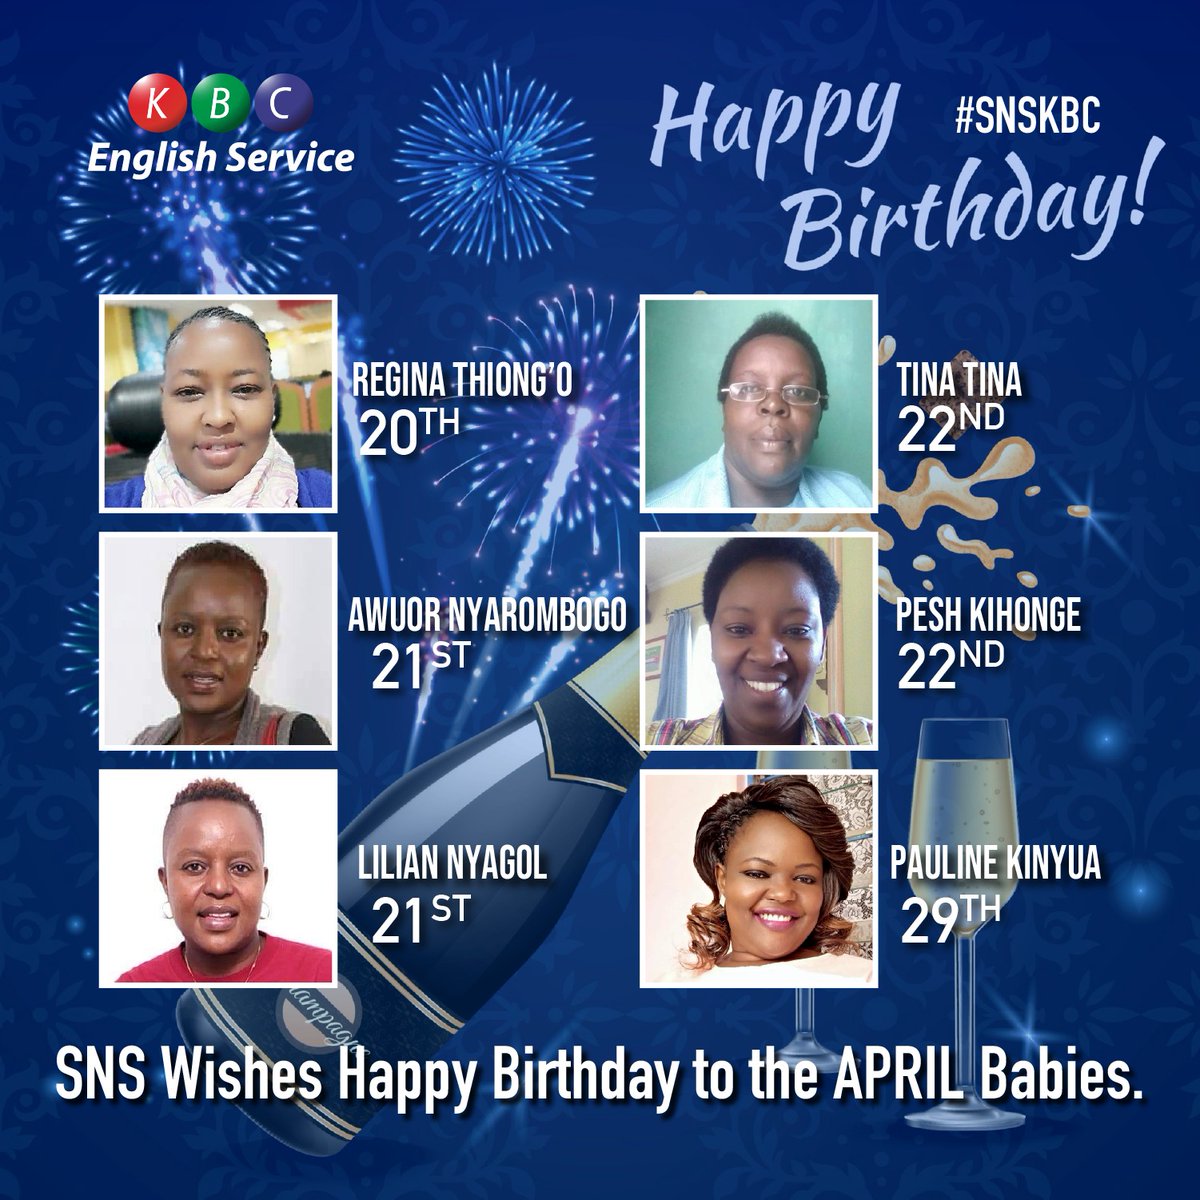 Shika Shika Time: Fire Meets Ice. What sweet tune should be on the playlist? Who dims the lights tonight? Red Corner: Laura Branigan vs Blue Corner: Marie Osmond. Also celebrating the April Babies. Goodtimes are back. #snskbc